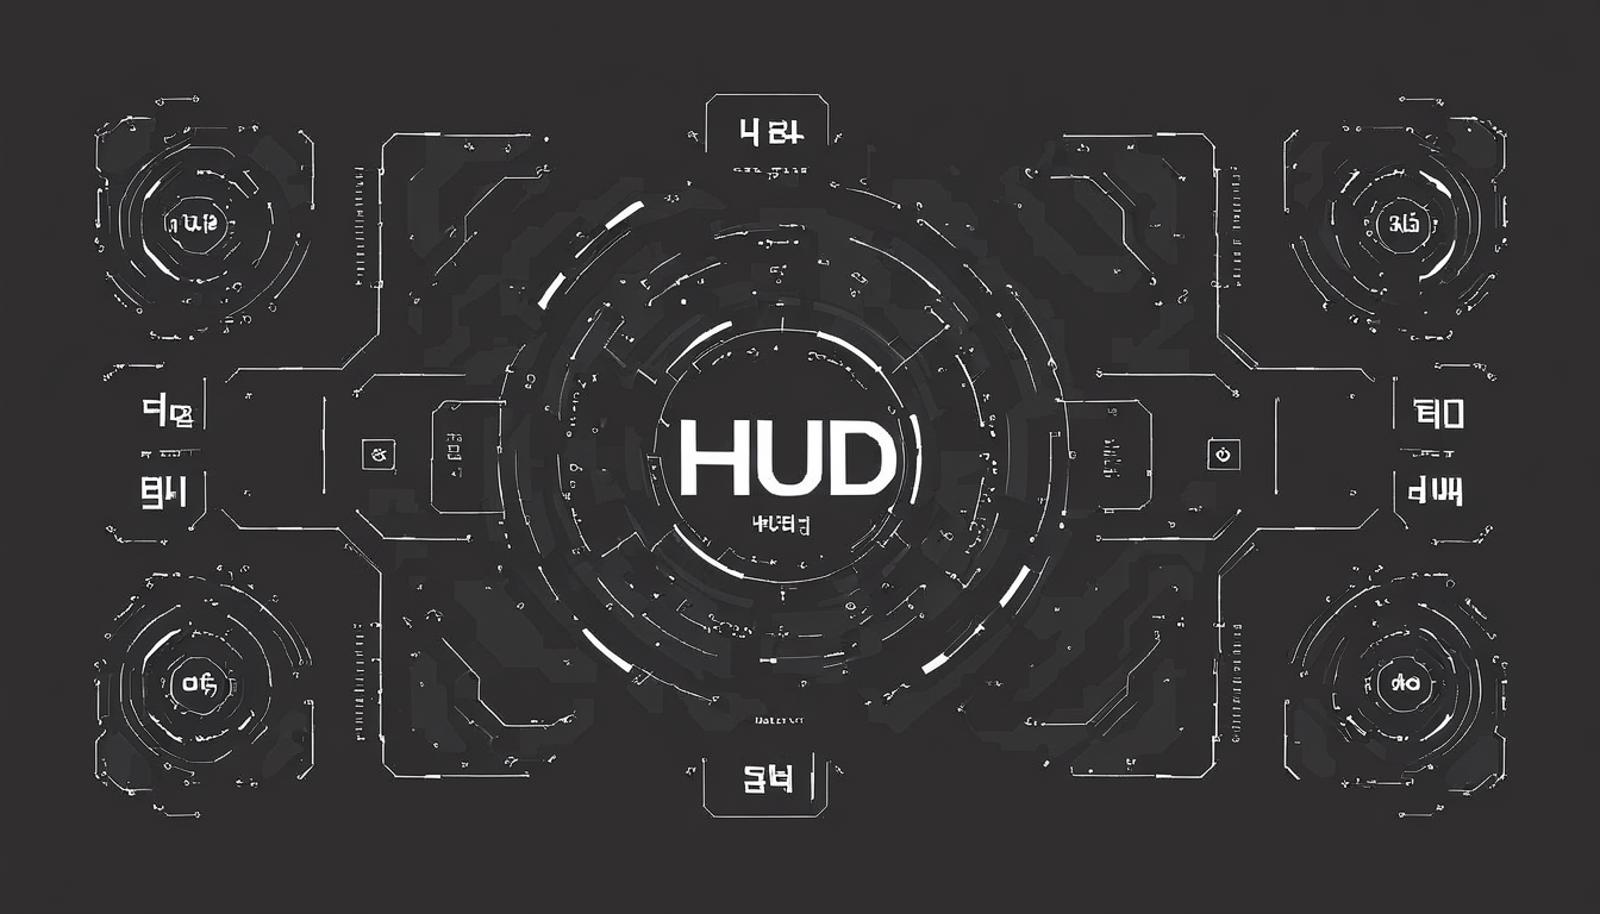 HUD image by Morpheus09